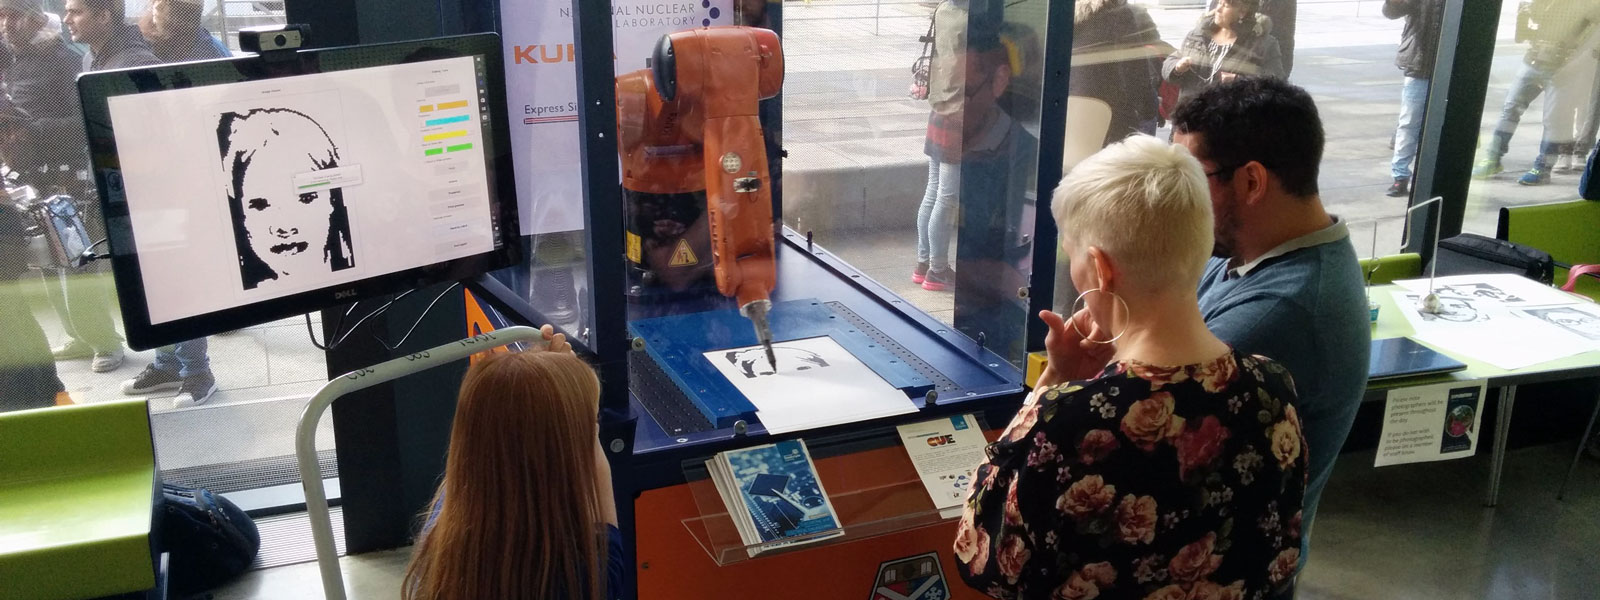 people standing looking at an orange robotic arm